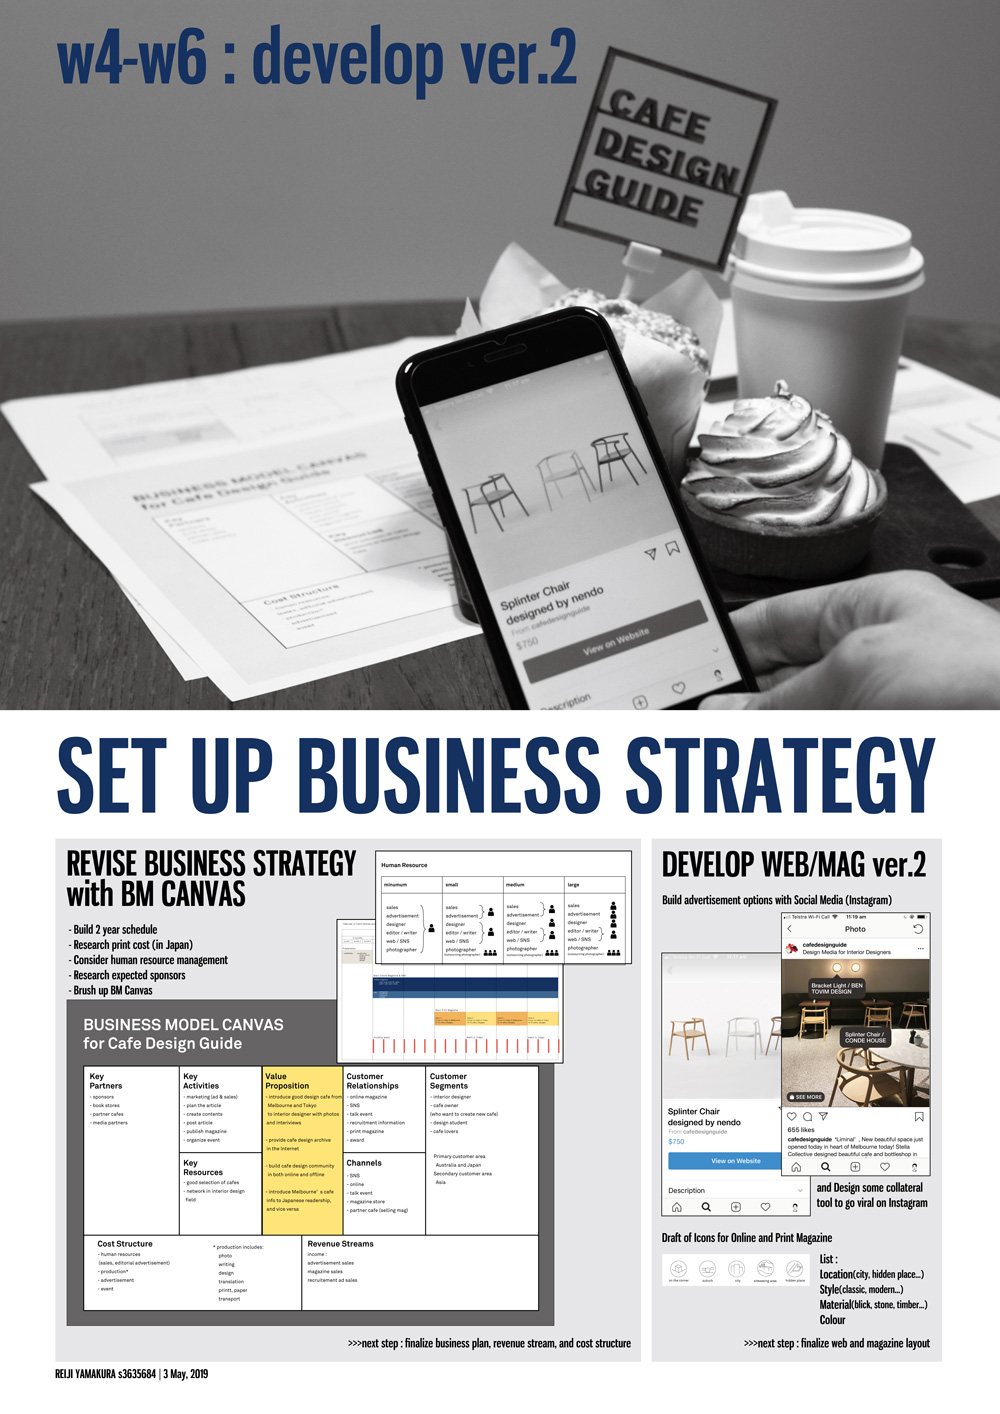 In phase 2, business strategy was revised to build more feasible plan for the cafe design media with 2 years timeline. Moreover, the social media usage was considered to obtain advertisement revenue.